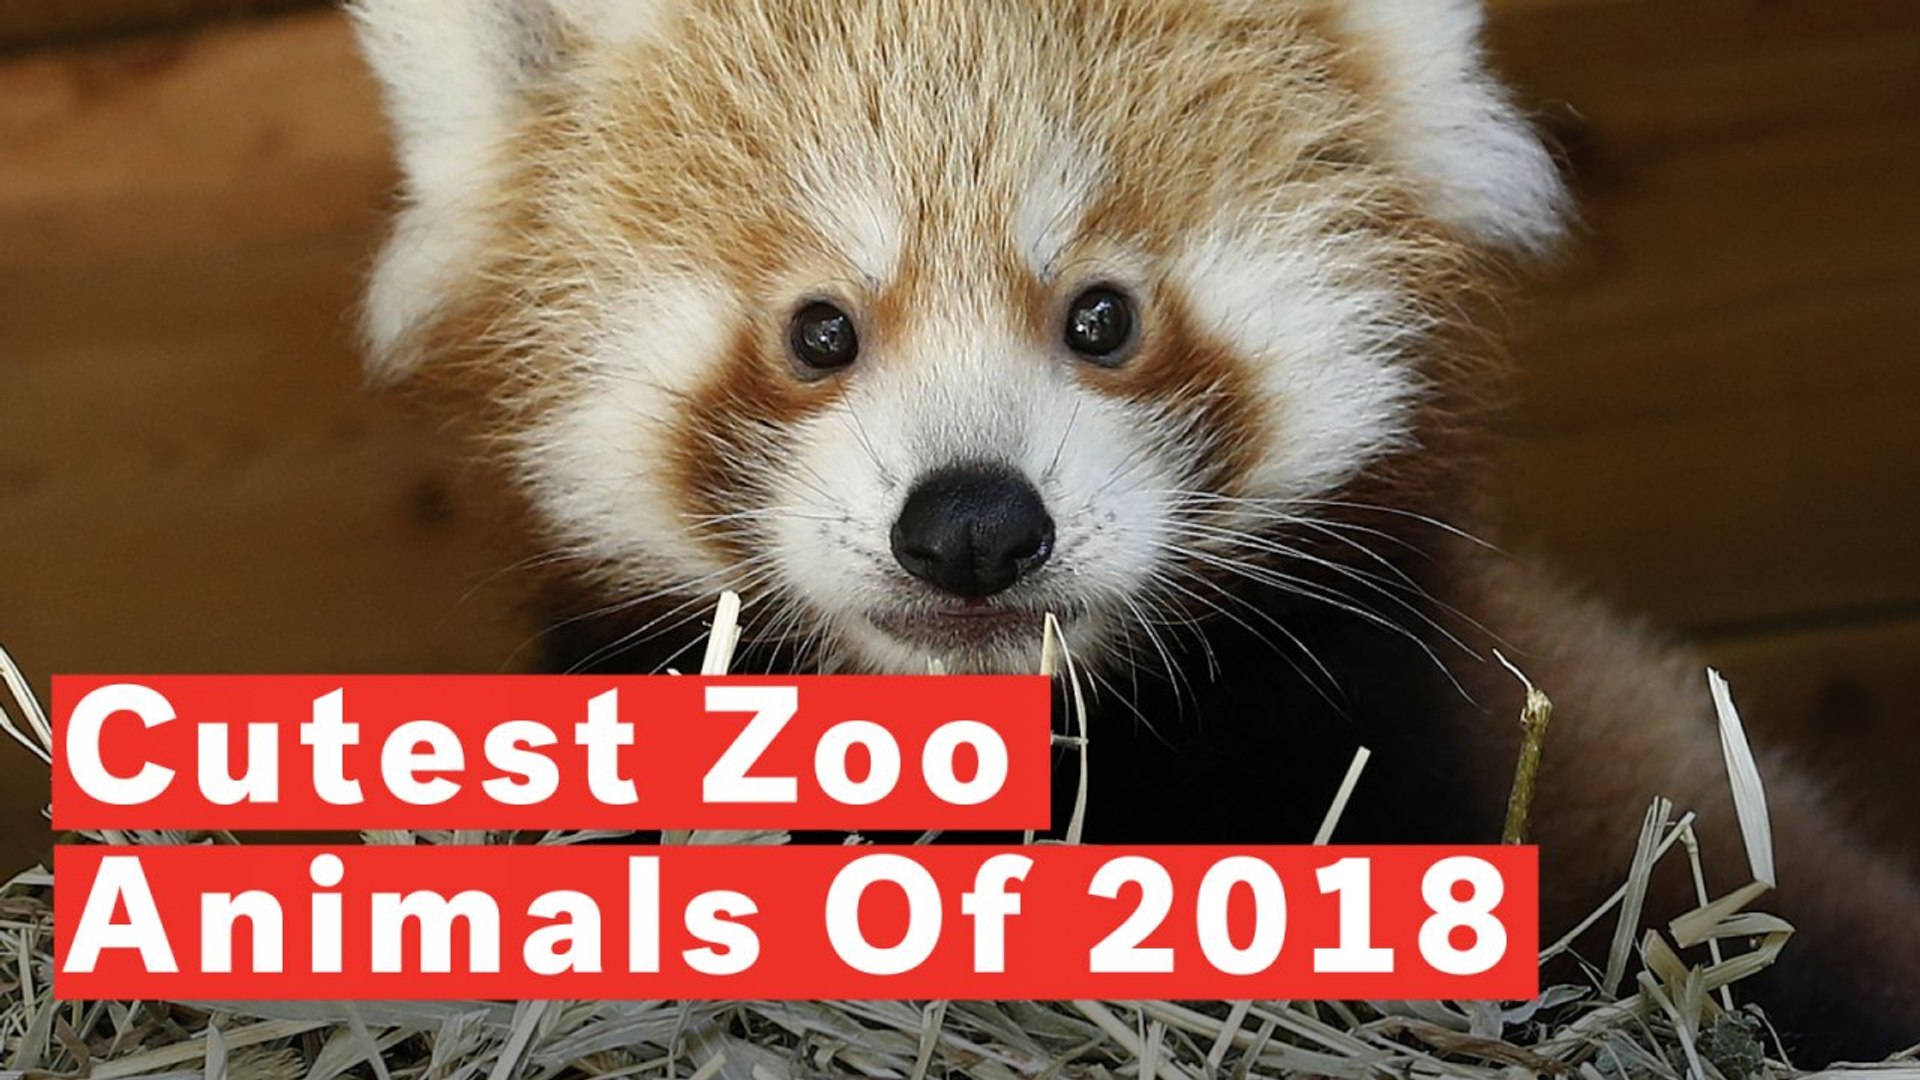 Top 10 Cutest Baby Zoo Animals Of 2018 - video Dailymotion